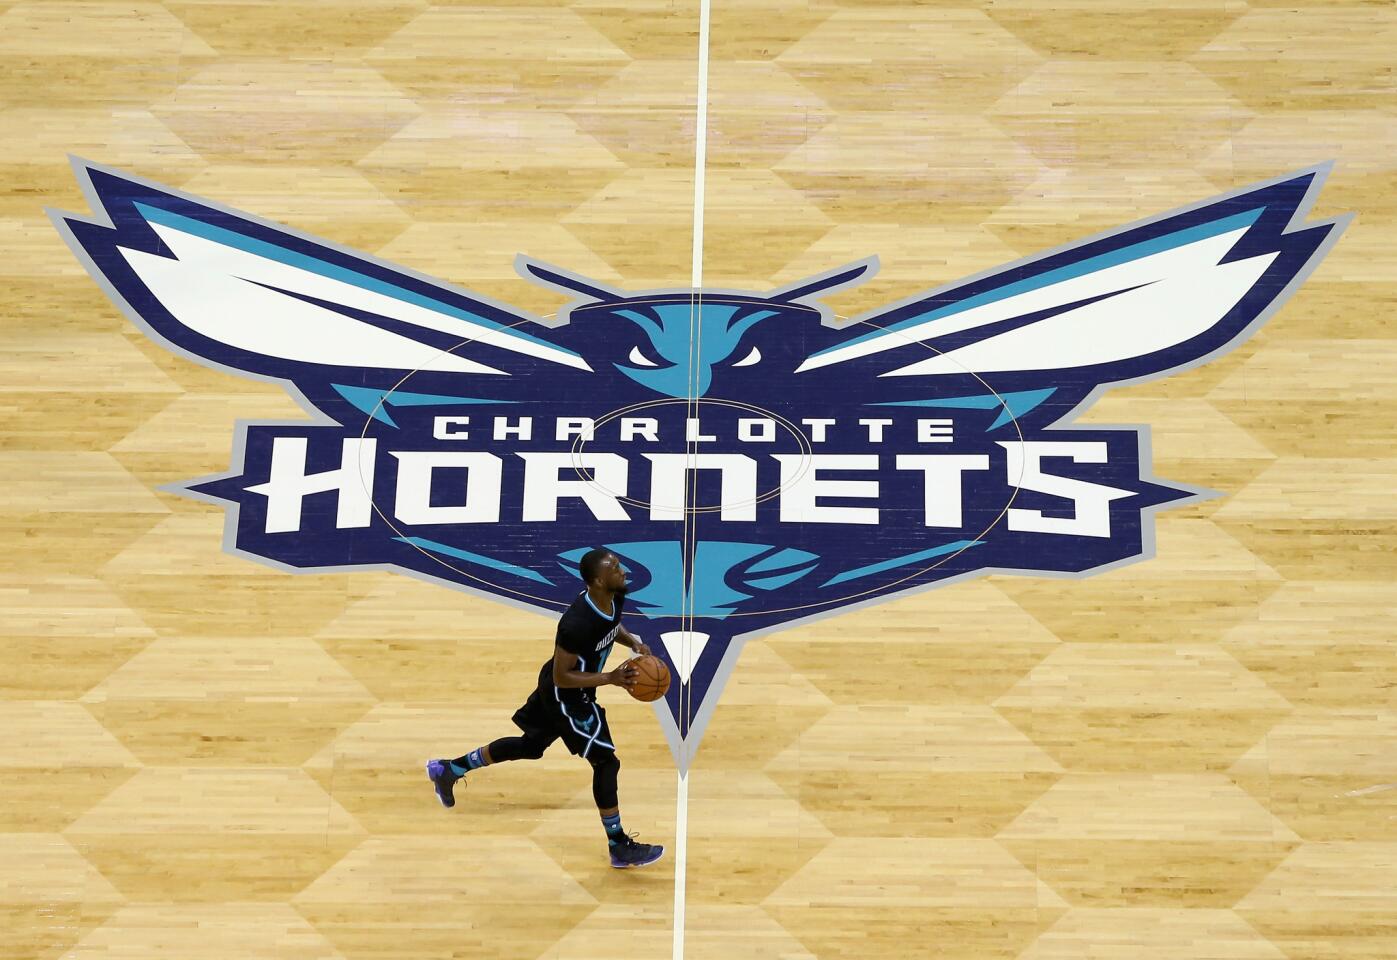 Hornets guard Kemba Walker brings the ball up the court during a game against the Lakers.